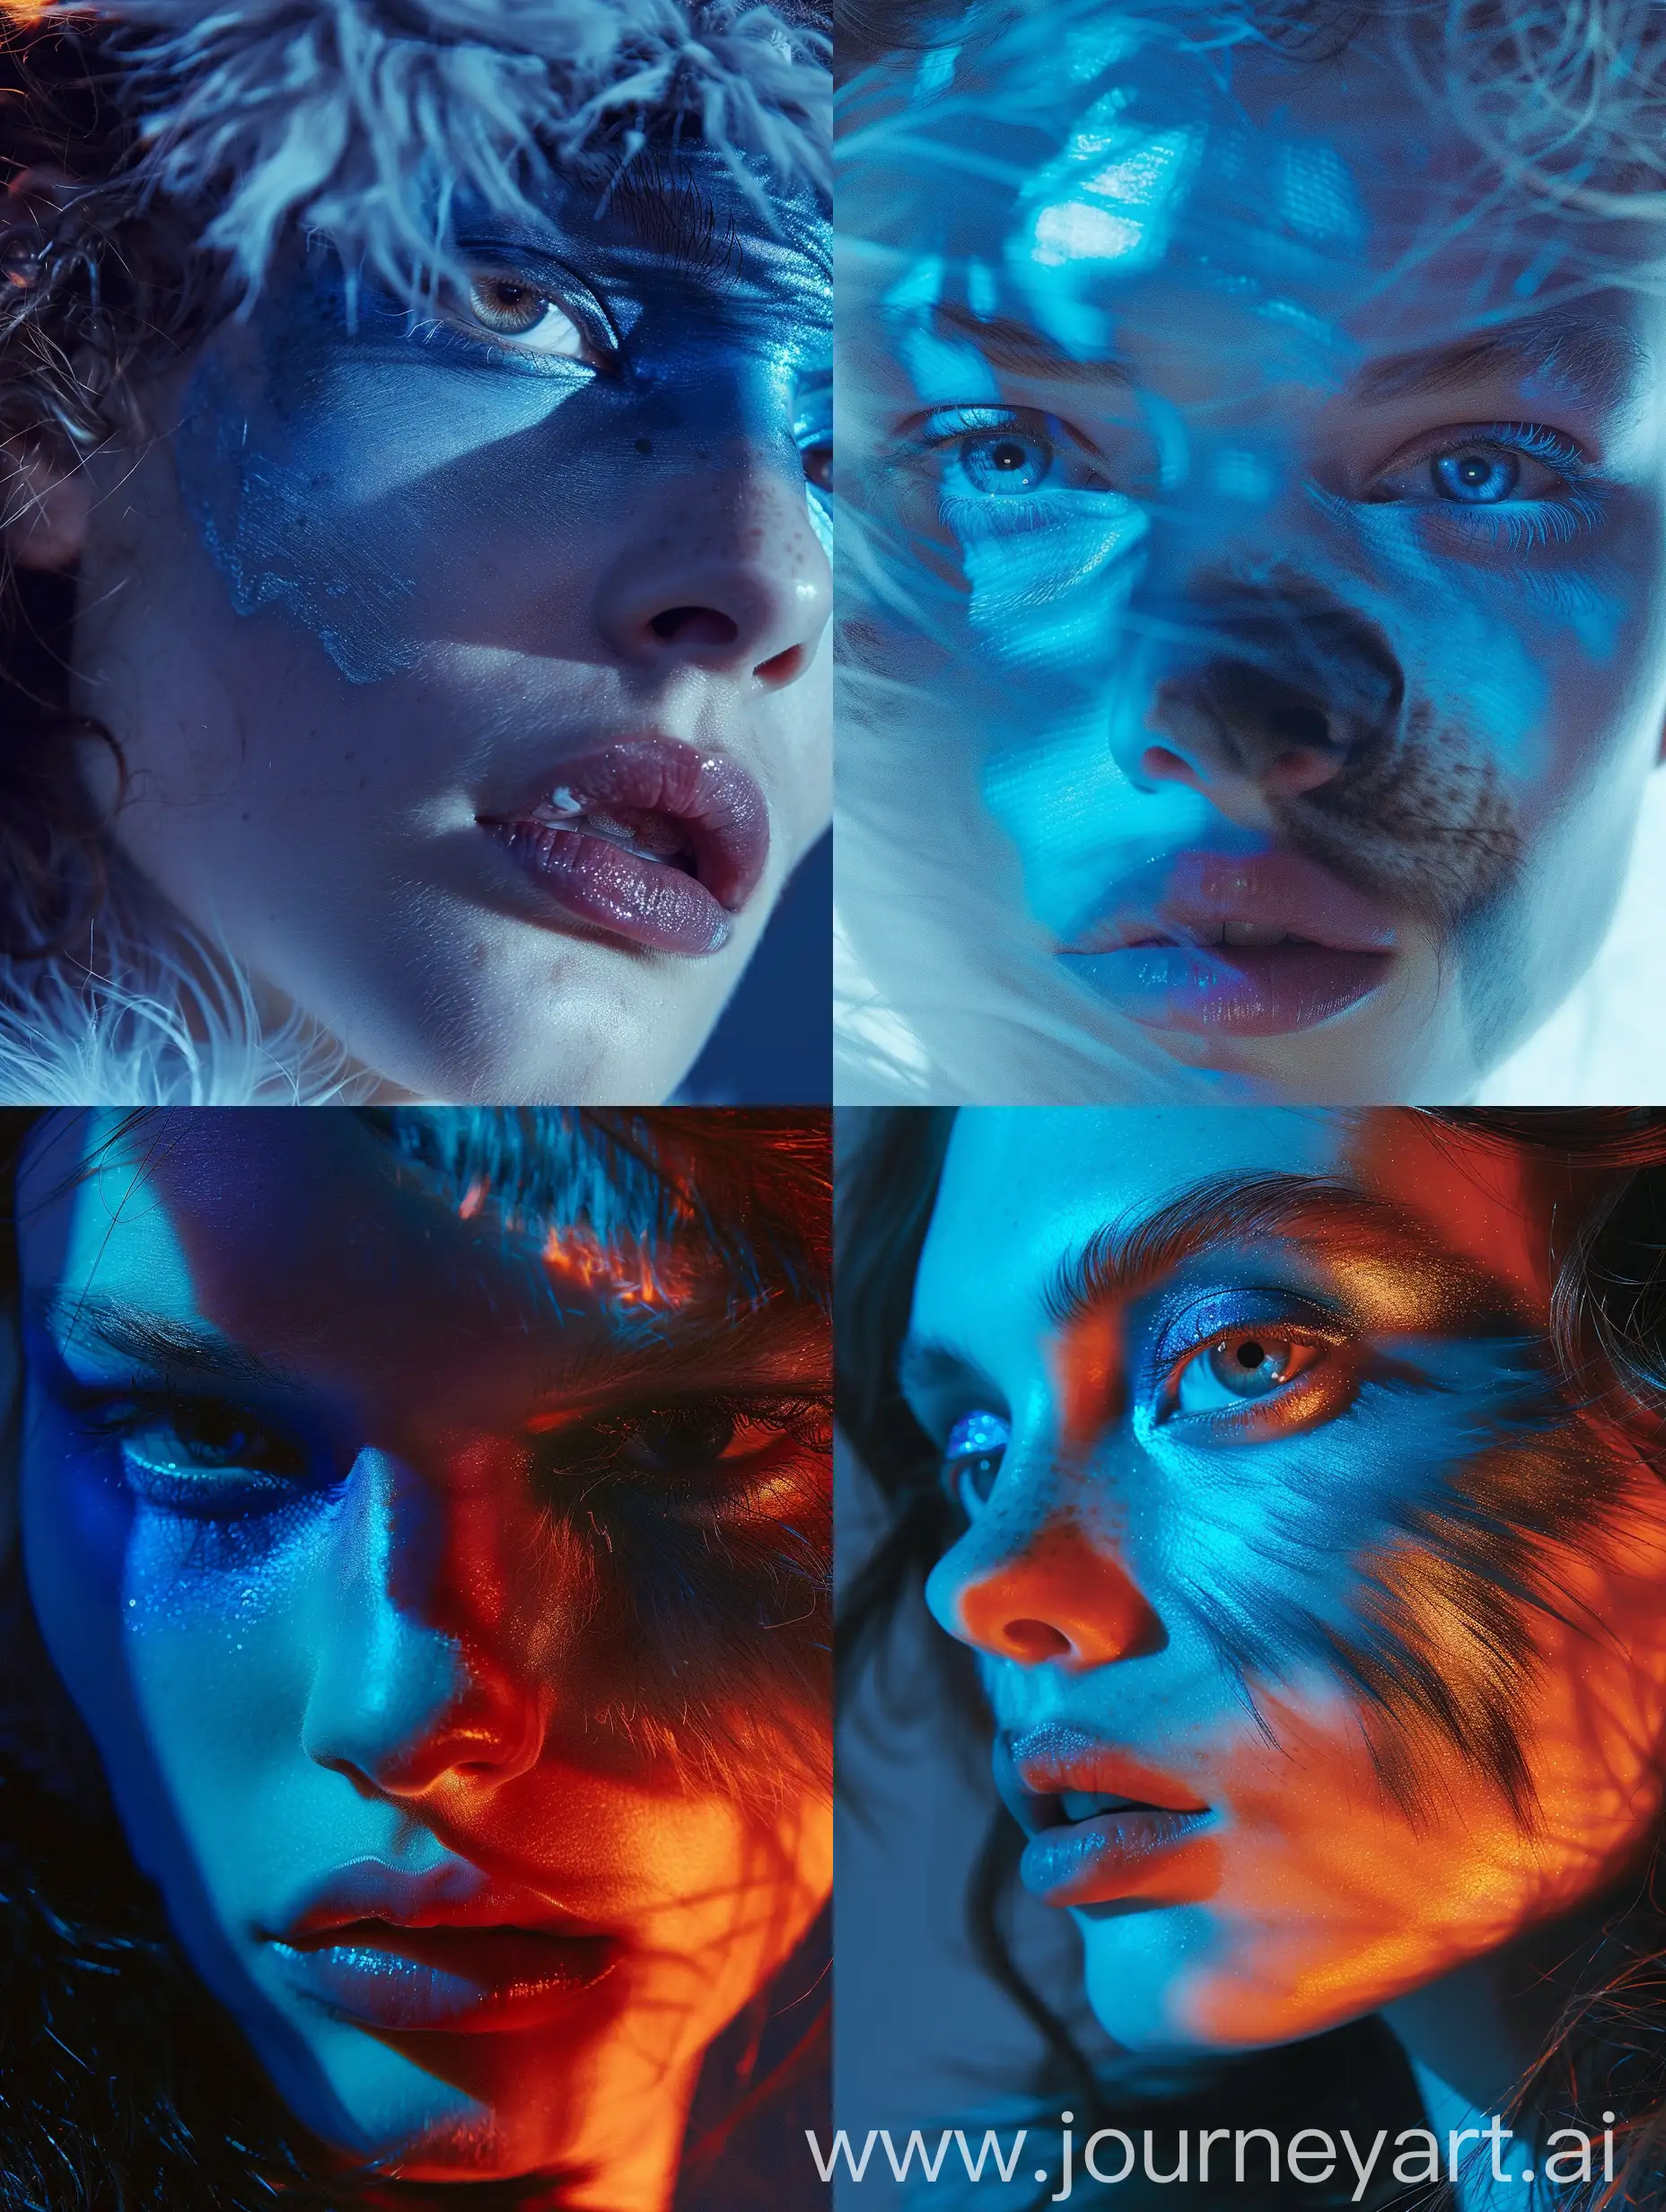 CloseUp-Portrait-of-Woman-with-Blue-Shadow-Makeup-Transformation-into-Werewolf